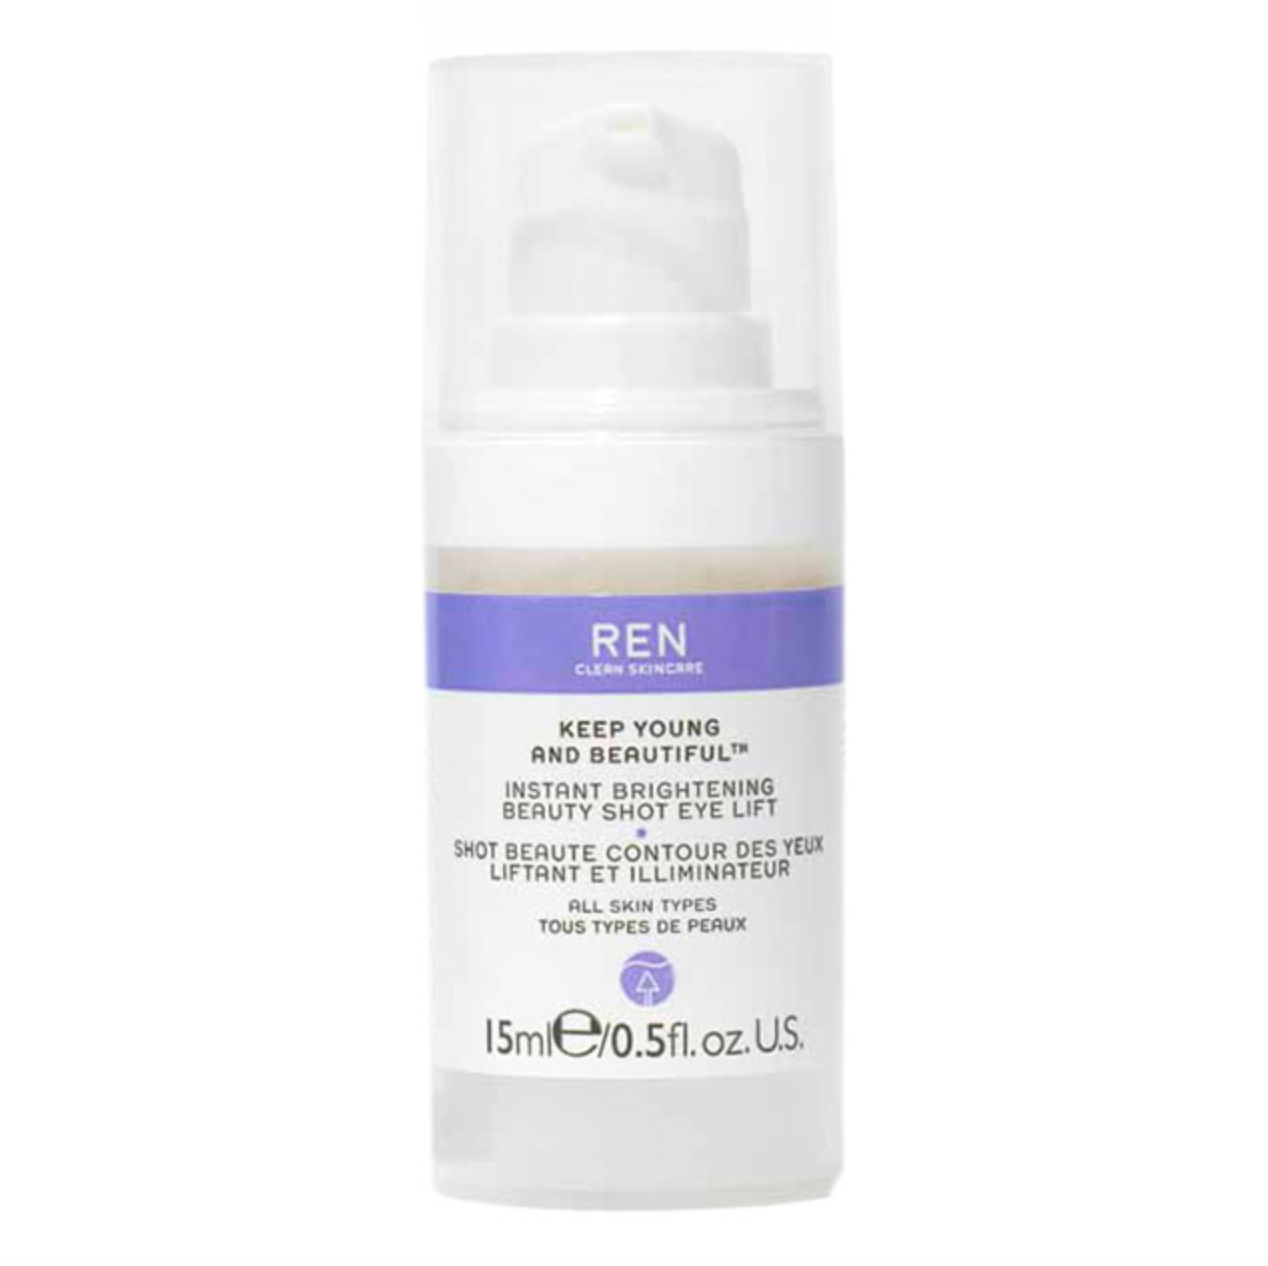 Keep Young And Beautiful Instant Brightening Beauty Shot Eye Lift